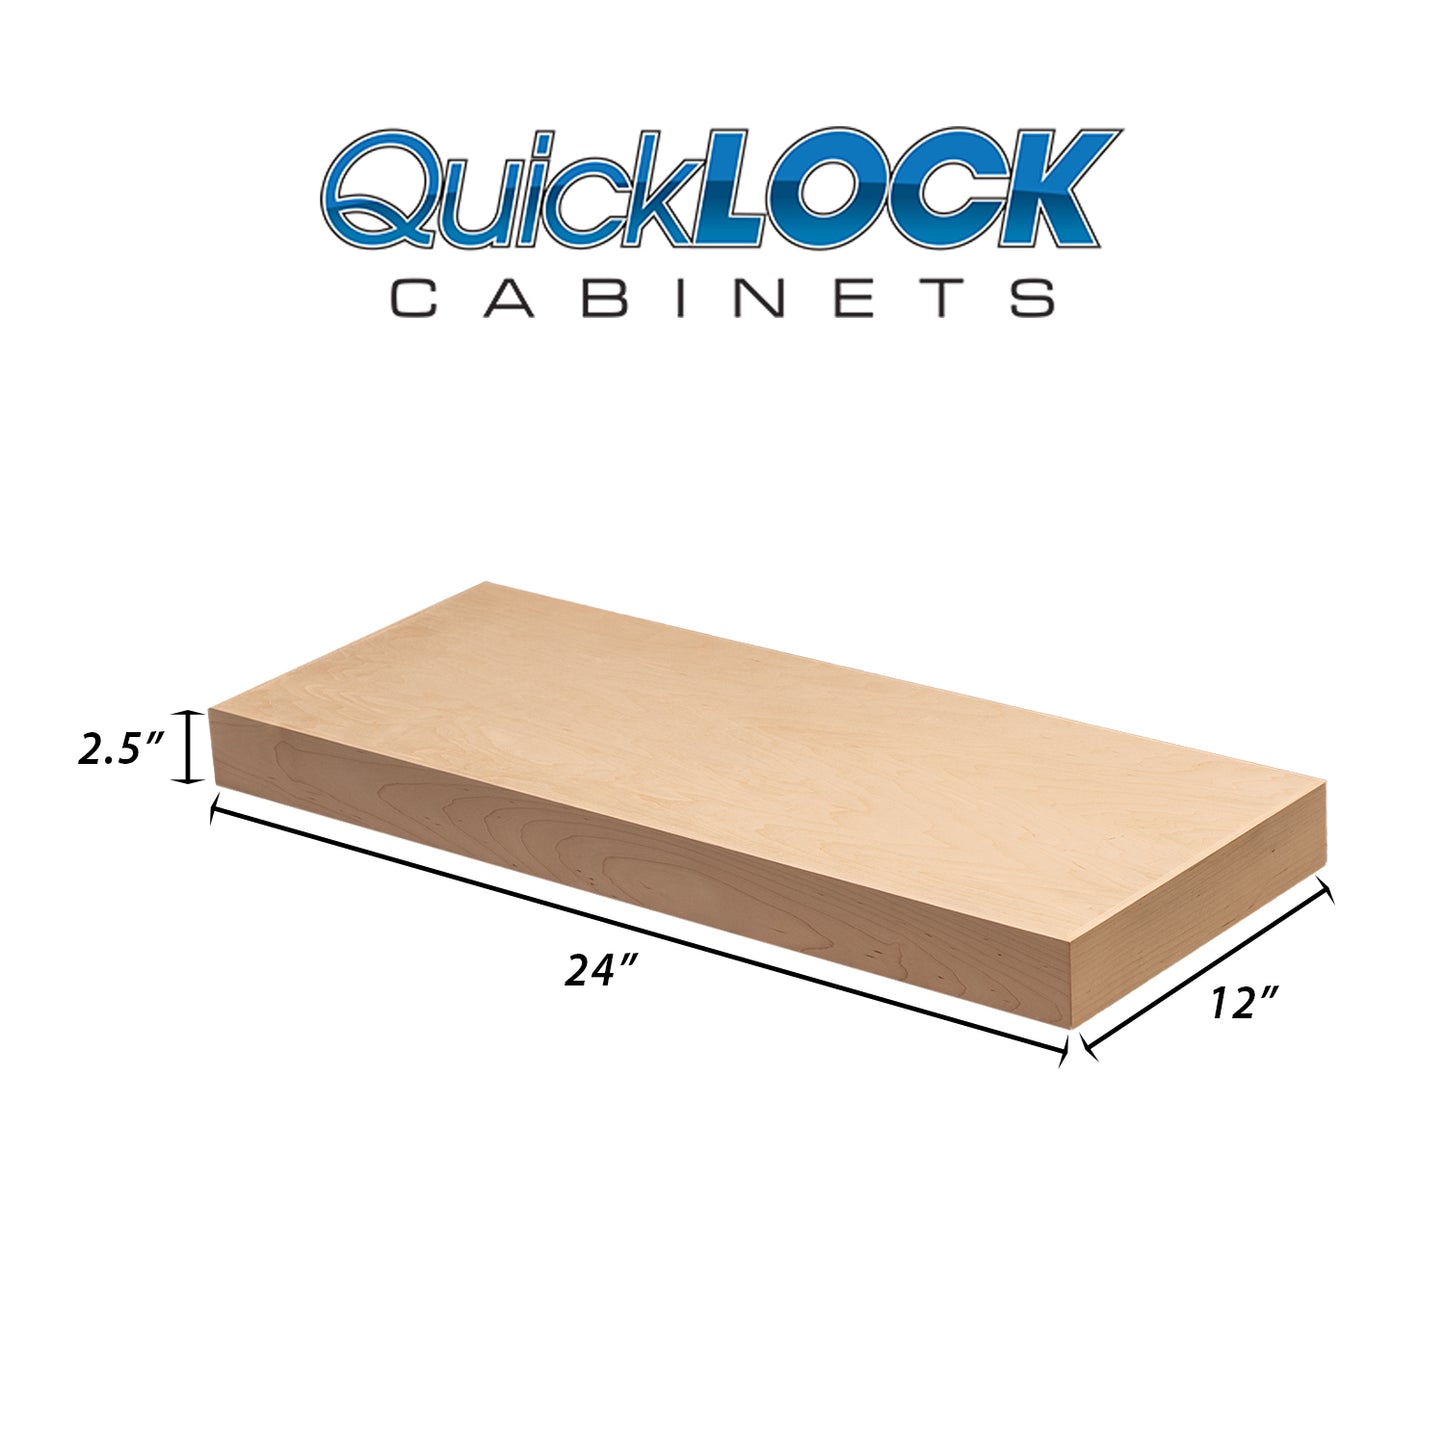 Quicklock Cabinets Floating Shelves | 2.5" Thick | Raw Maple, 12" D x 24" W x 2.5" H | American Made | Hardwood Bracket | Complete Shelf Unit